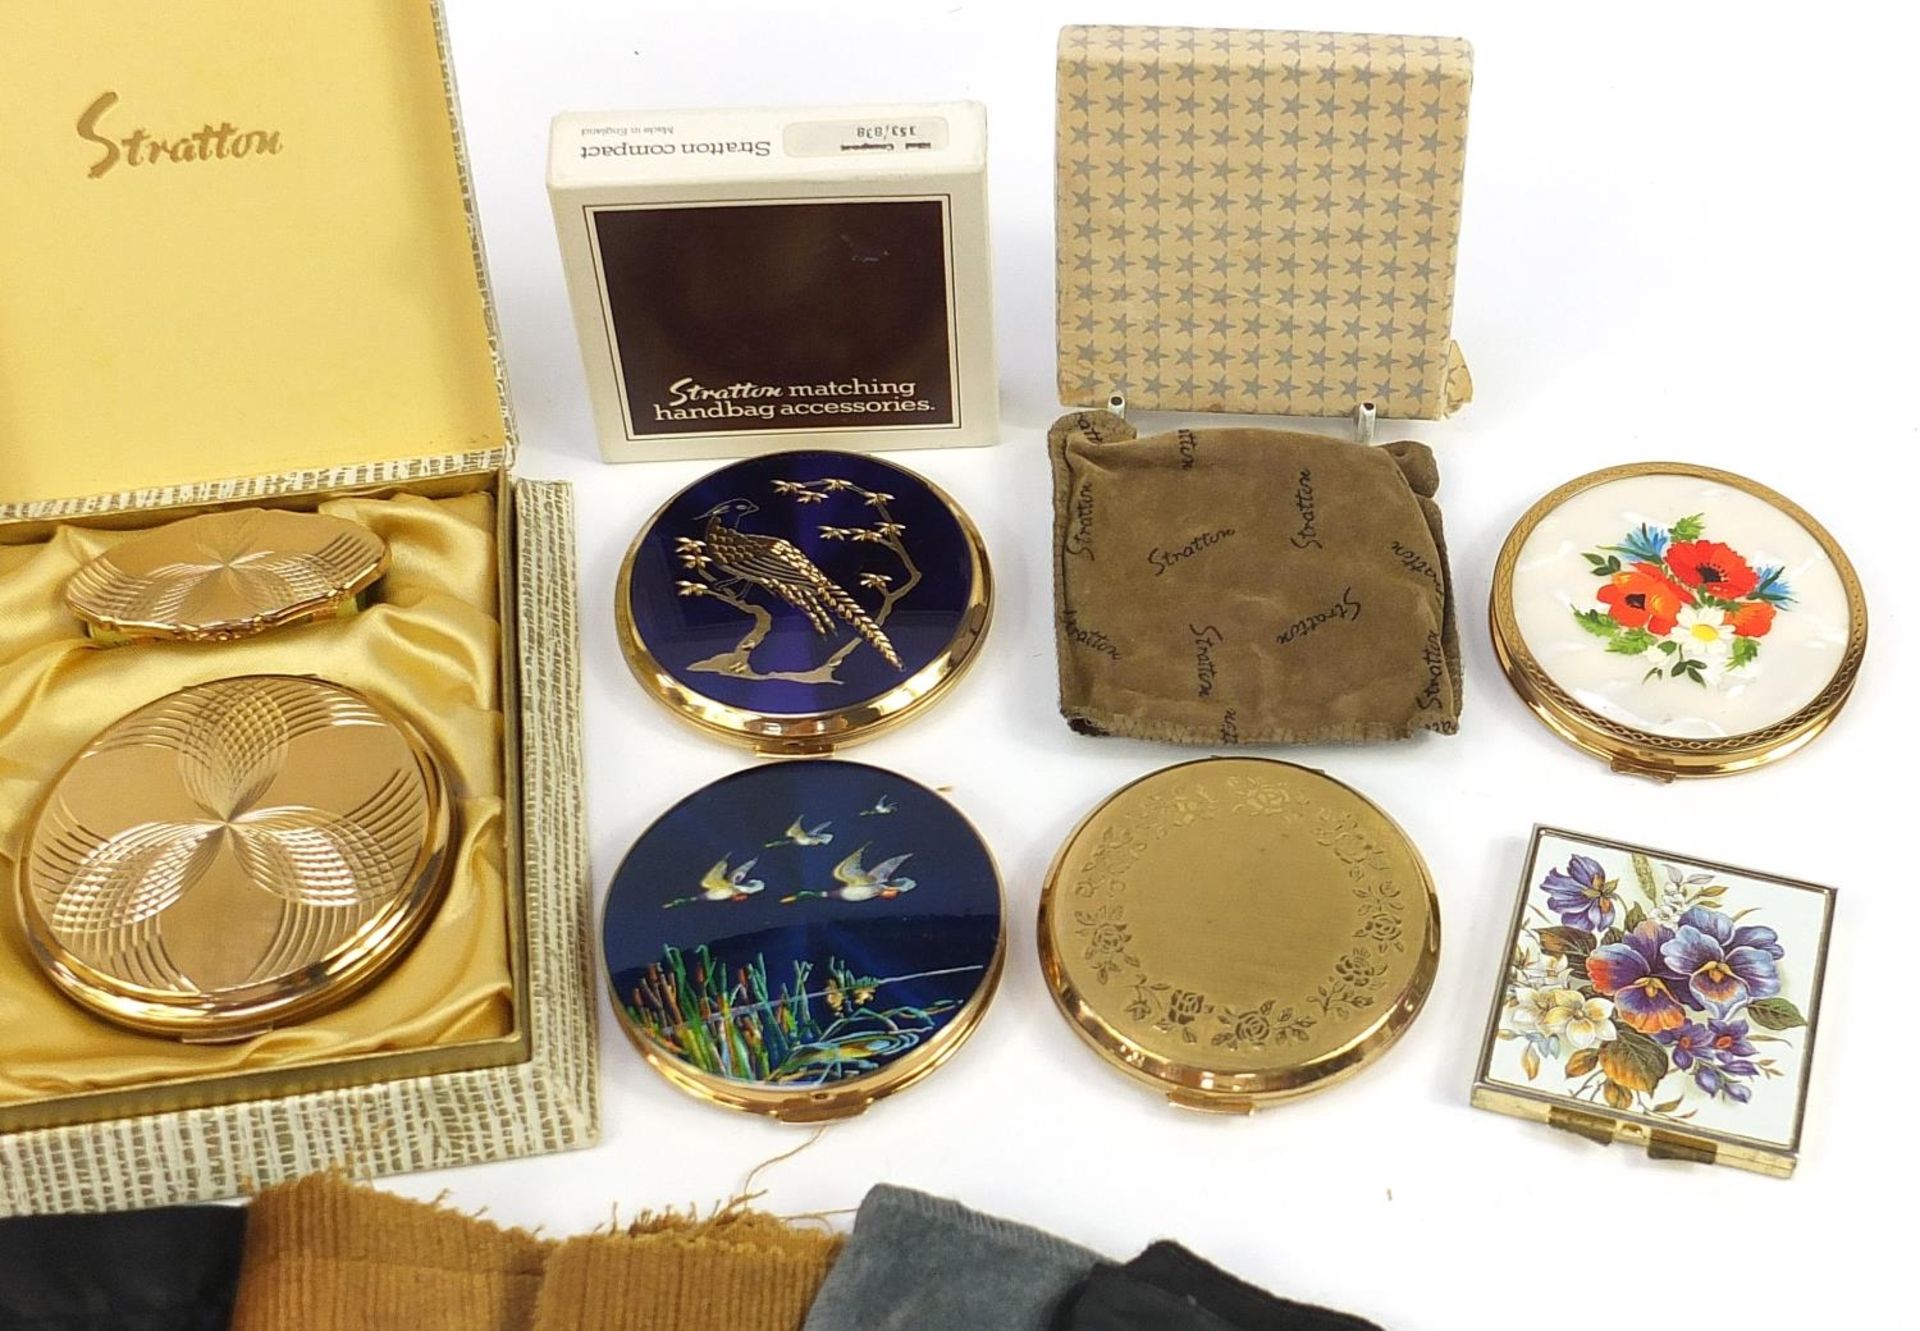 Twelve vintage ladies powder compacts and a tooled leather cigarette case, some enamelled - Image 3 of 4